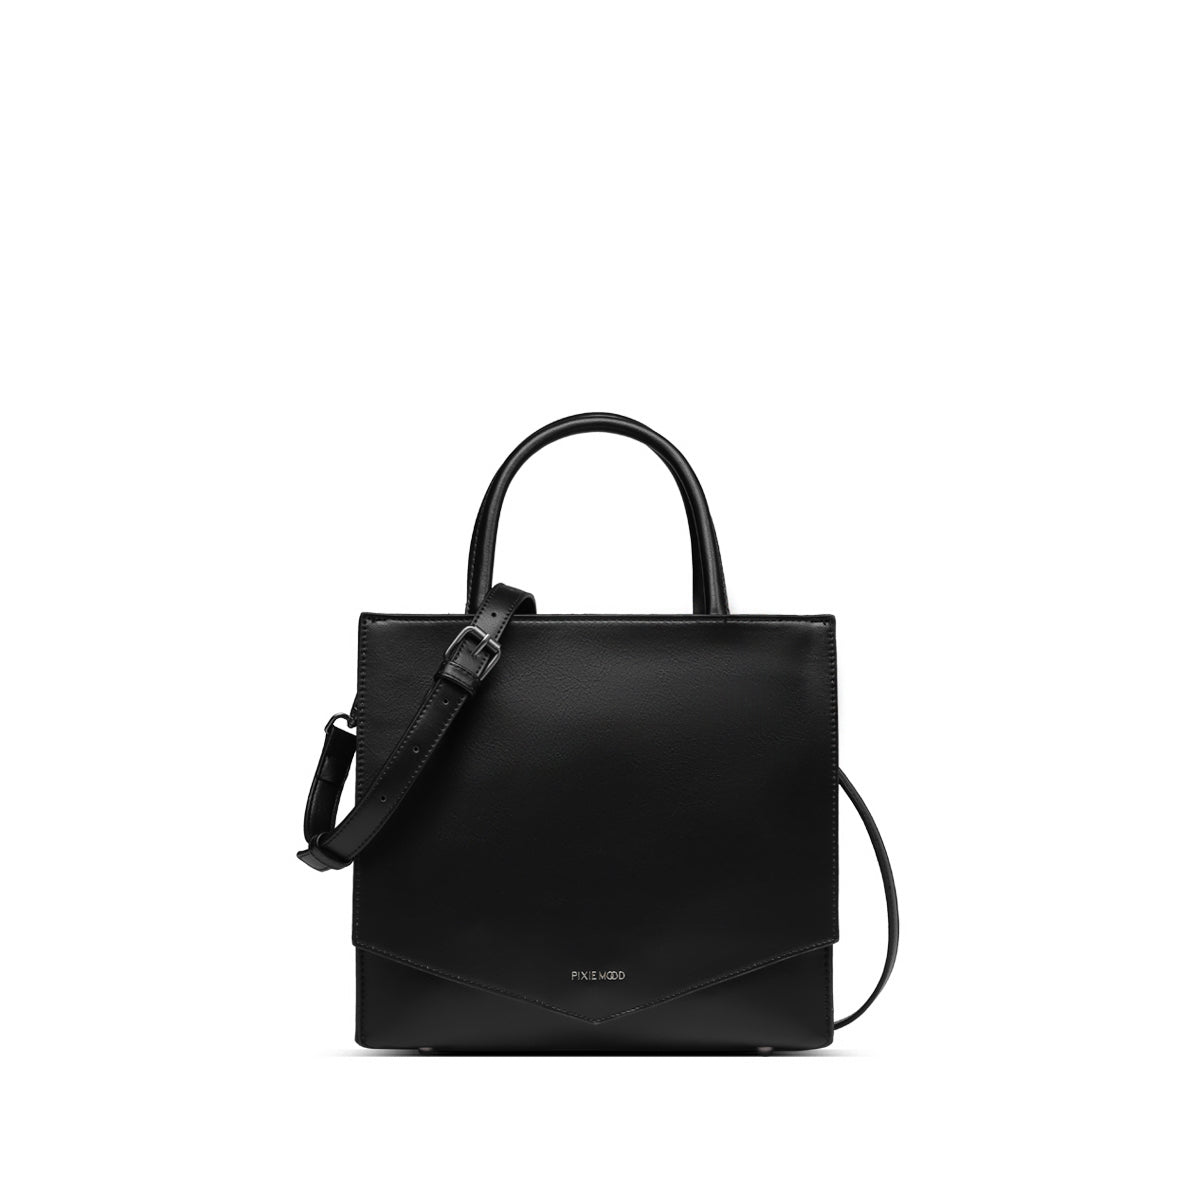 Caitlin Tote - Small